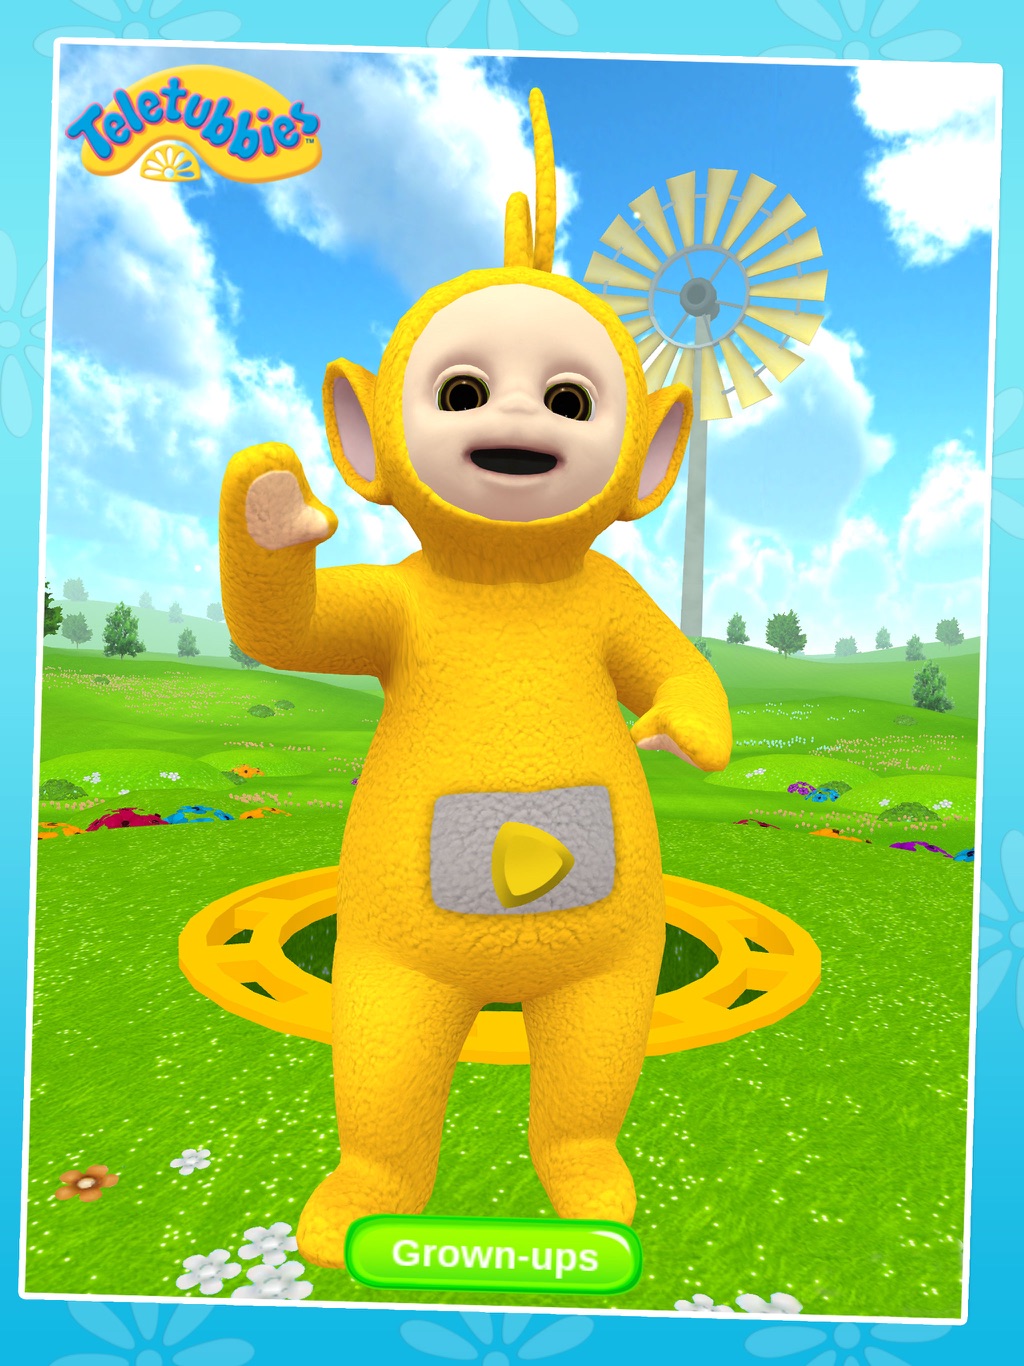 Teletubbies Apps Tinky Winky Dipsy Laa Laa Po For Ios And Android My